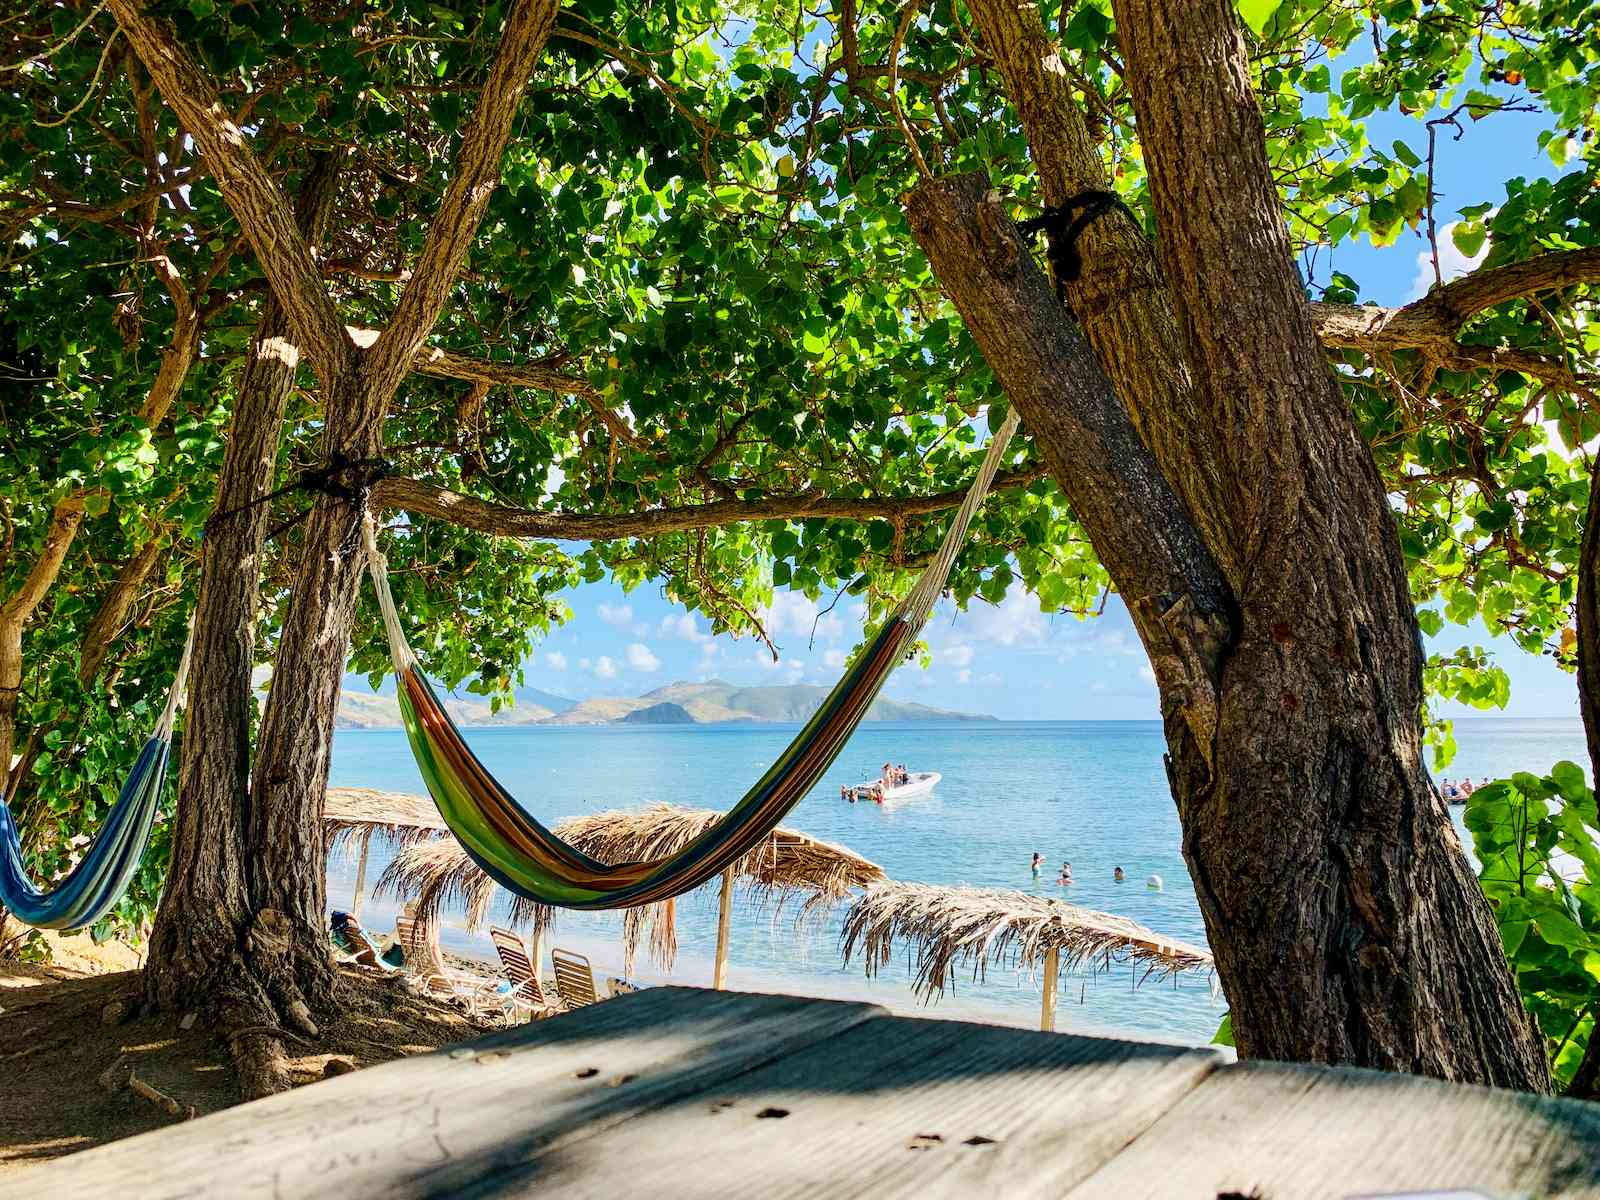 A hammock under a shady tree in Saint Kitts and Nevis.